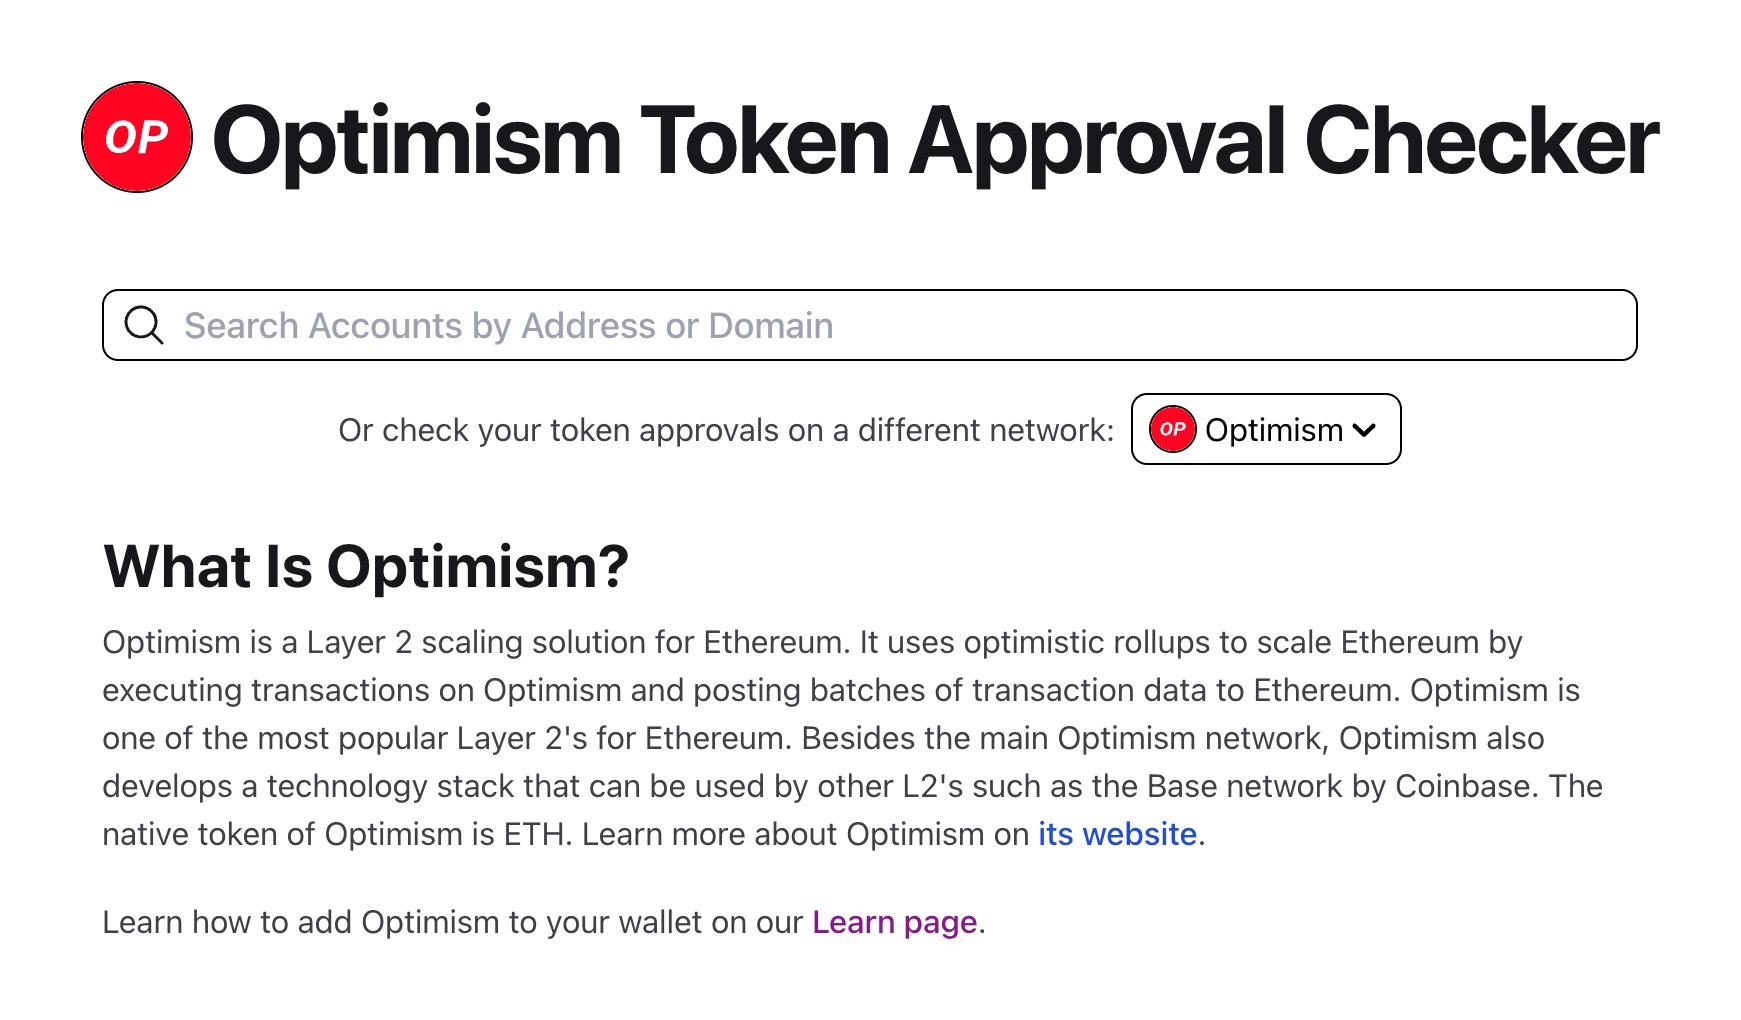 Optimism Token Approval Checker